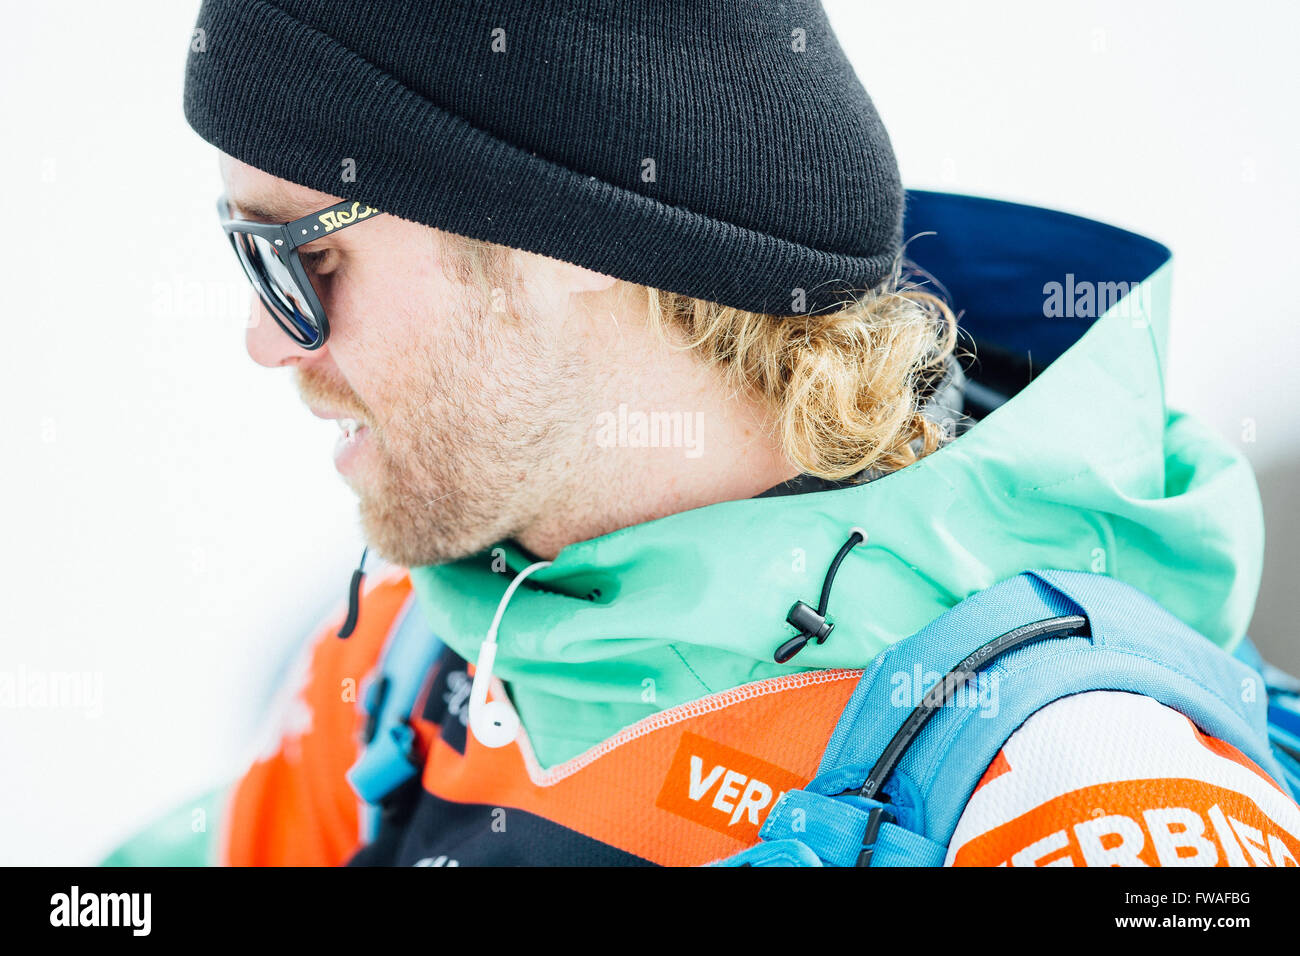 VERBIER, Switzerland: April, 2, 2016  American snowboarder Christopher Galvin at the Verbier Xtreme contest. Stock Photo